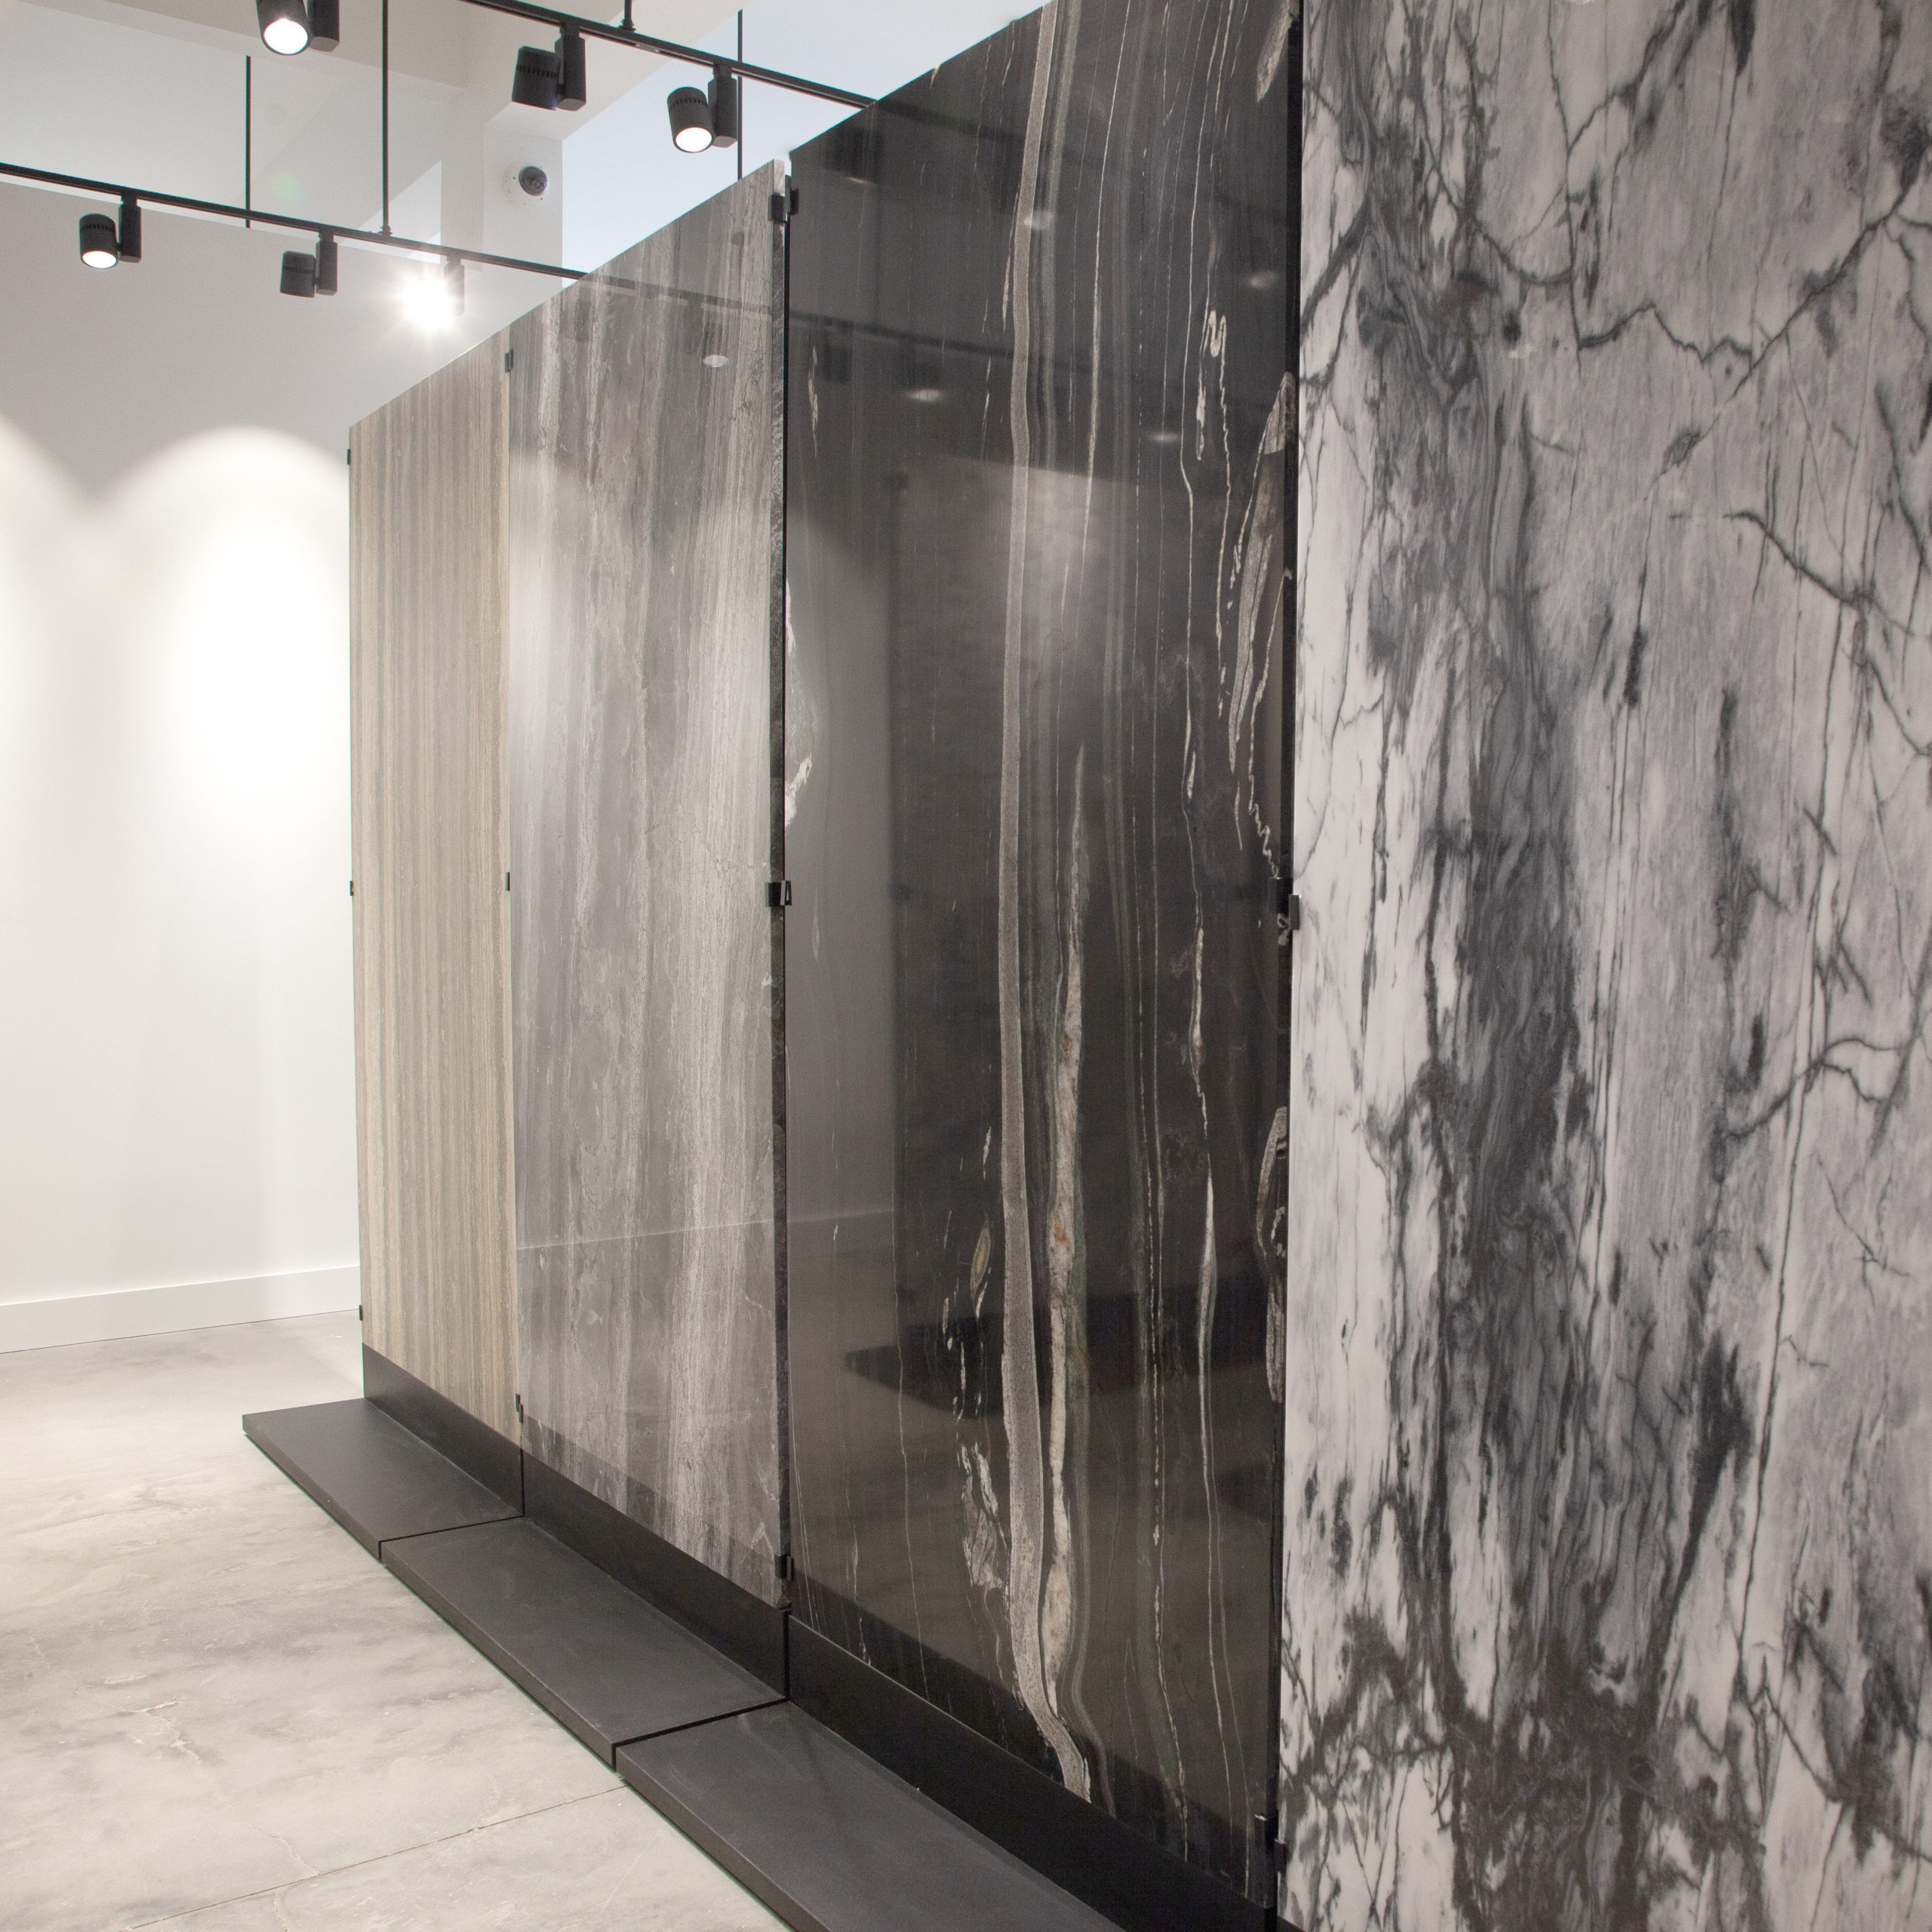 Large-scaled porcelain slabs are one of the unique features at the new Nemo Tile + Stone showroom in Southampton.